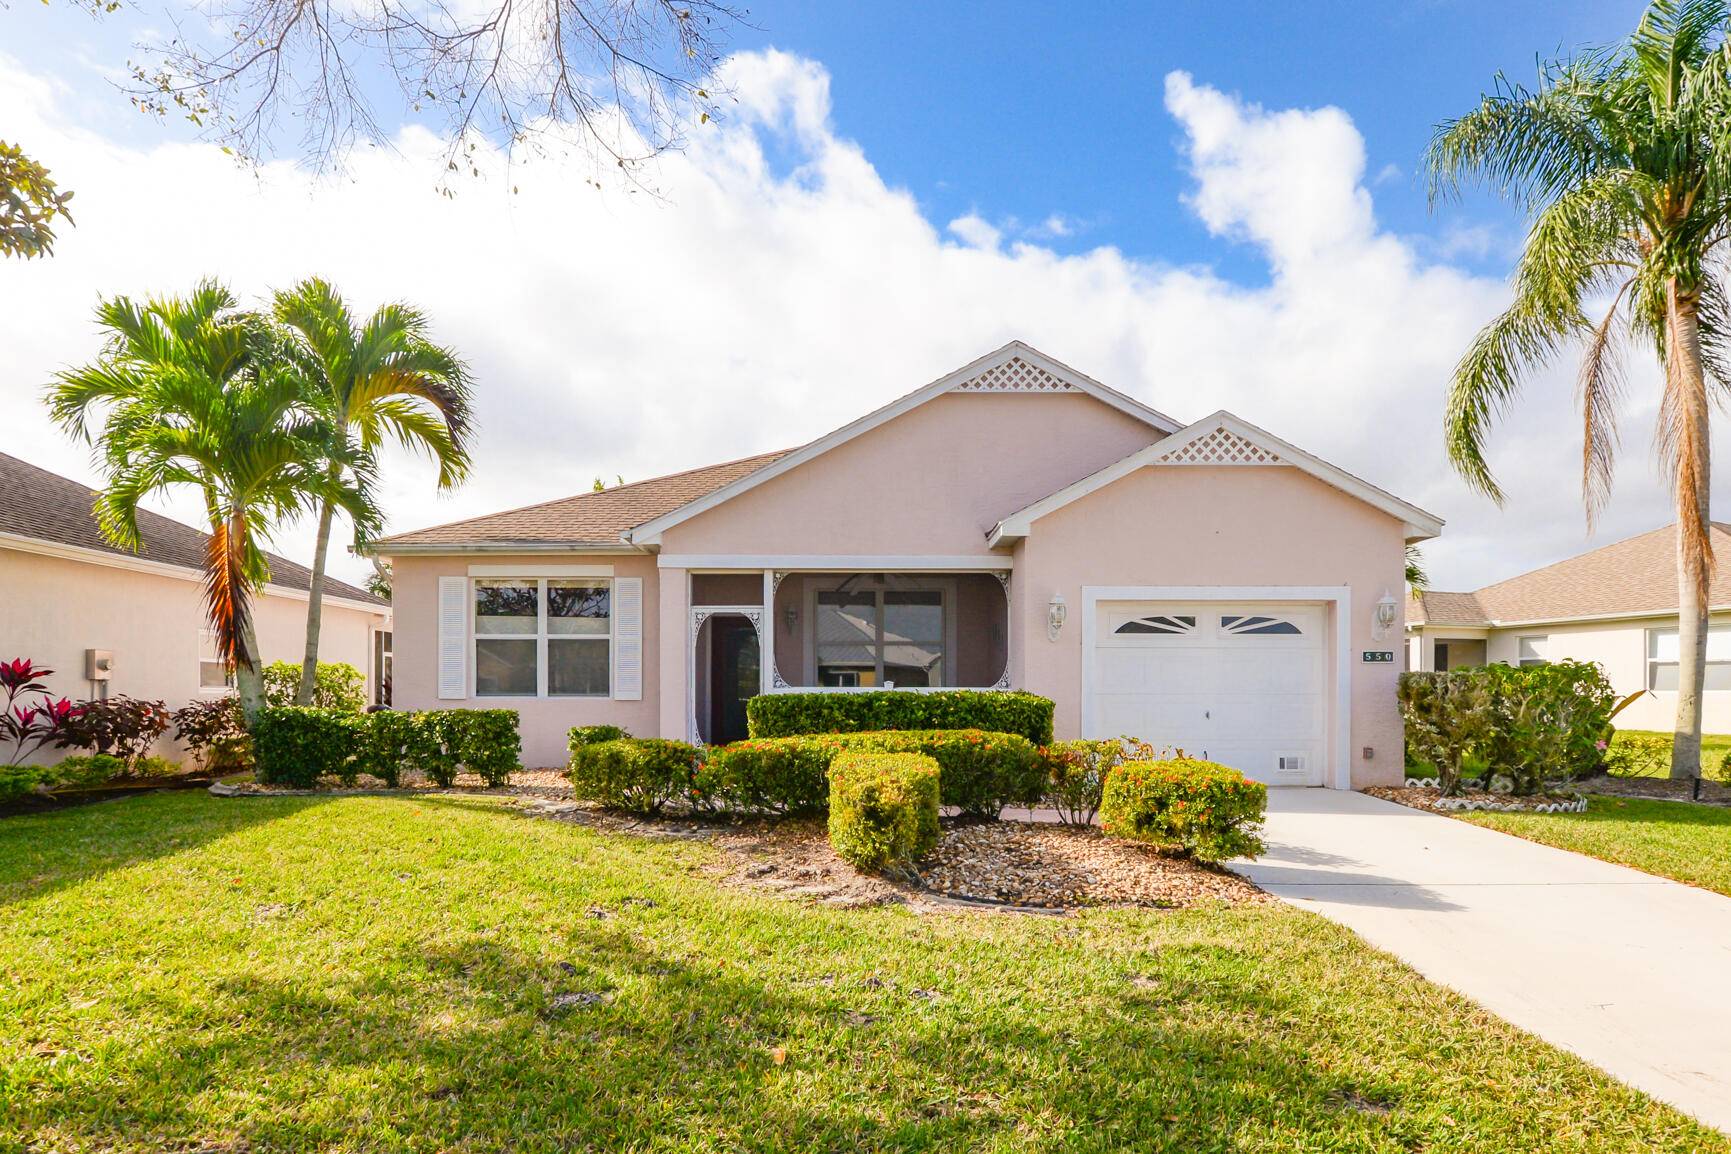 Lovely Lake Front Home in Isle of San Marino at Kings Isle 55 community in St Lucie West.